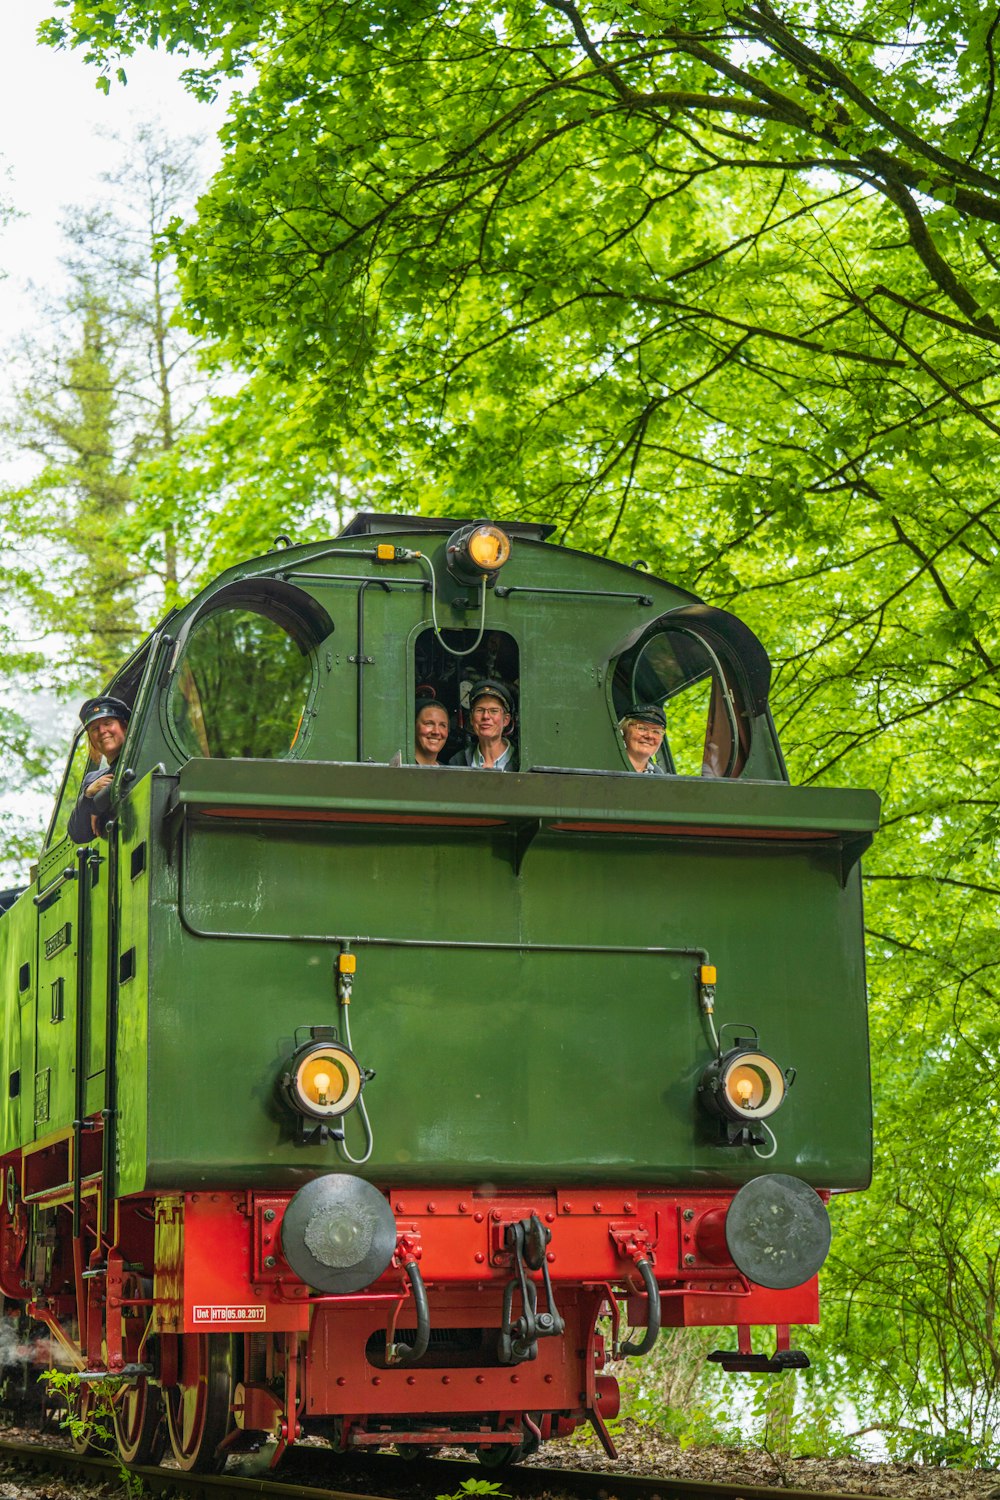 a green train traveling through a lush green forest